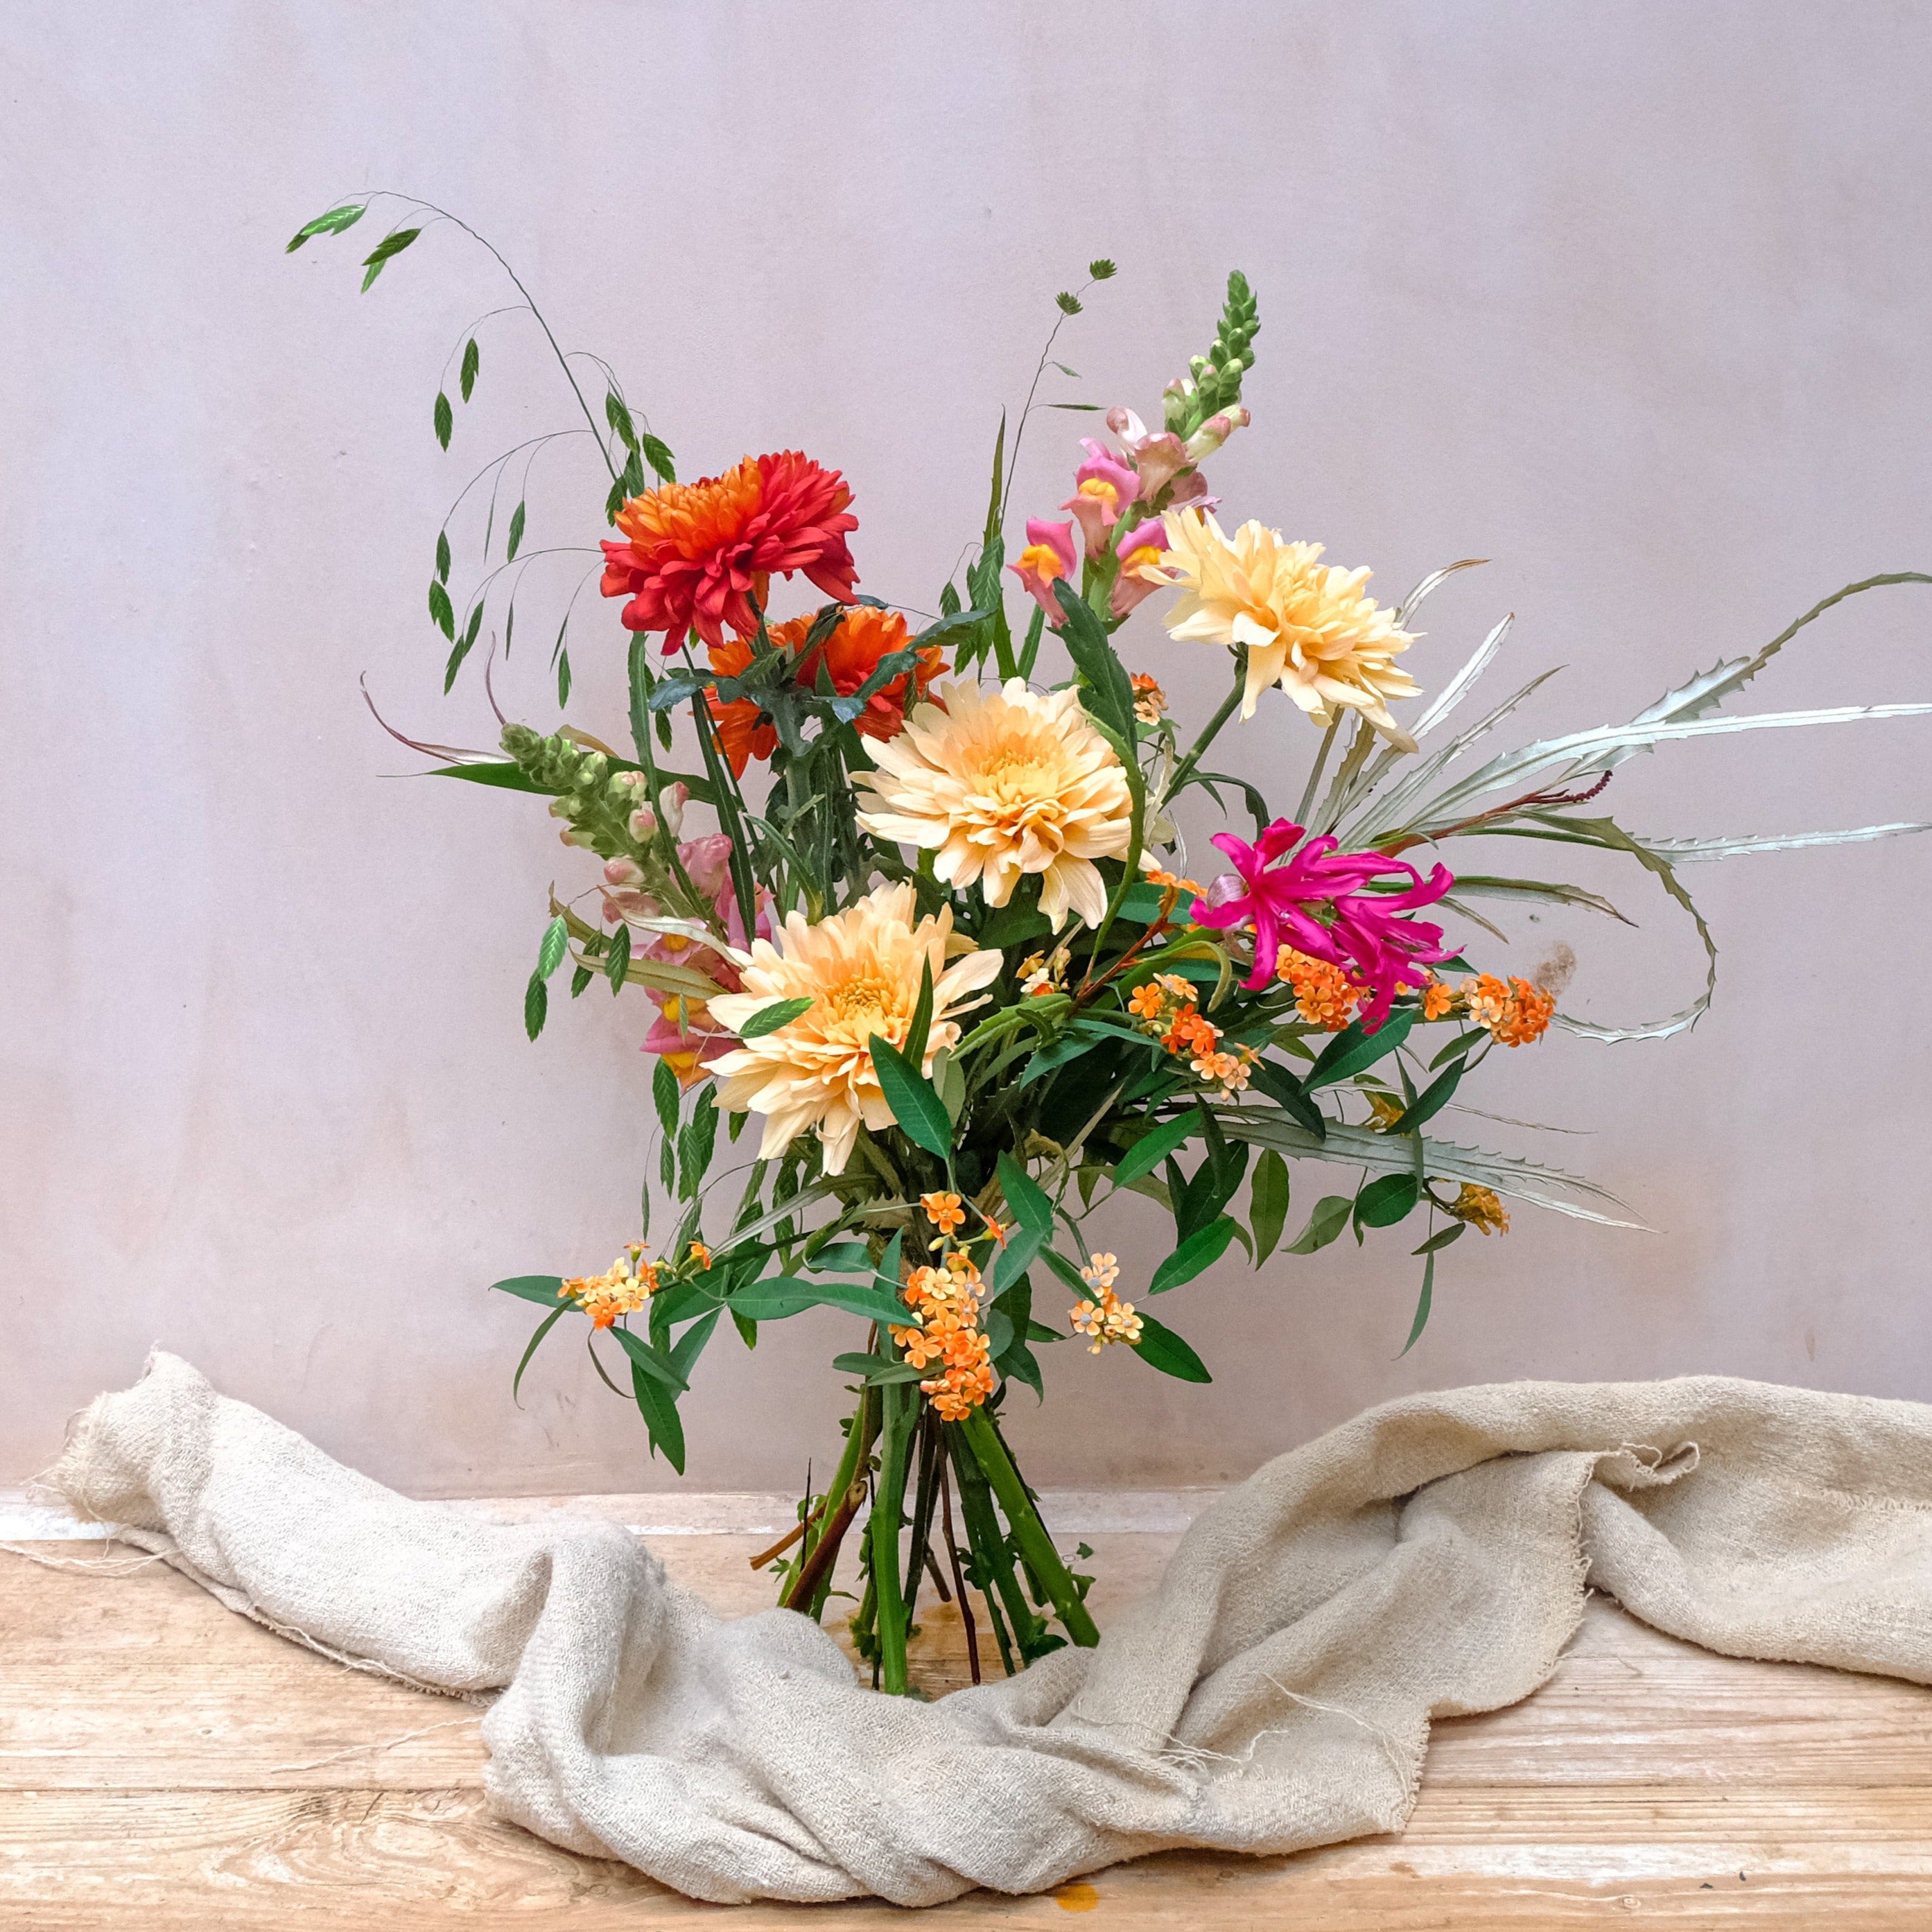 Autumn flowers bouquet with chrysanths, available to order online for London and UK nationwide delivery